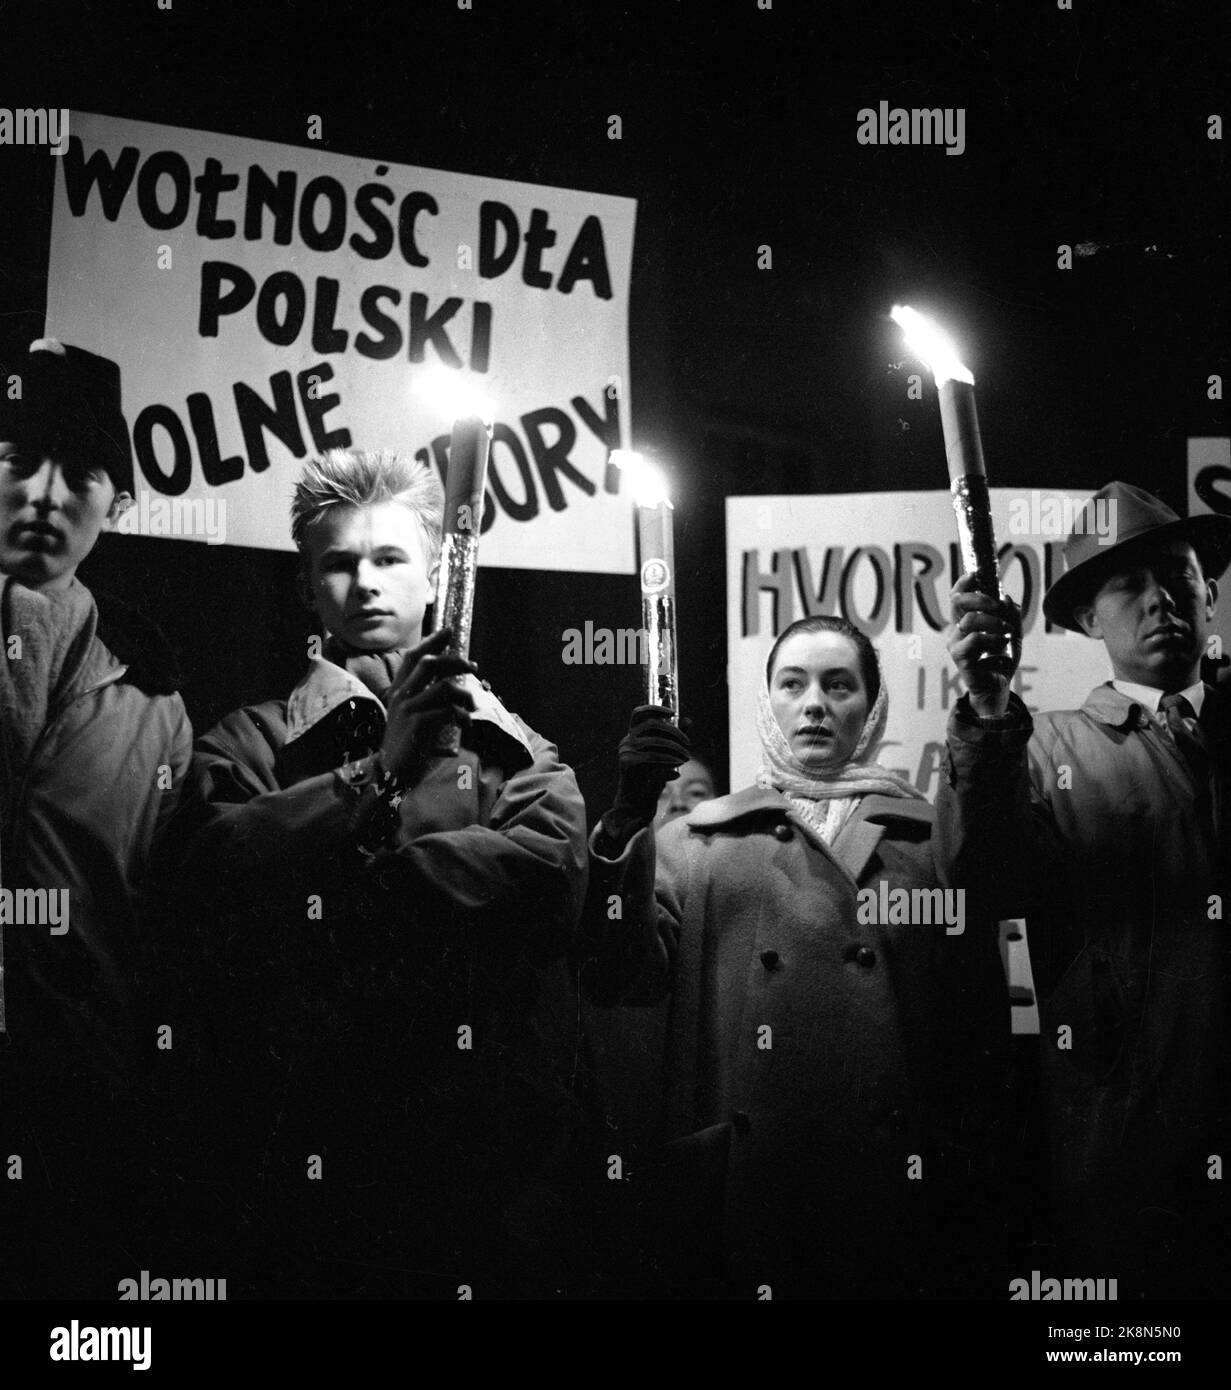 Oslo 19561106 In November, Soviet forces moved into Hungary and cut down the public rebellion against Soviet rule. Mass meeting and demonstrations at the universe of the Soviet invasion. Here, protesters with torches and posters. Photo: NTB / NTB Stock Photo